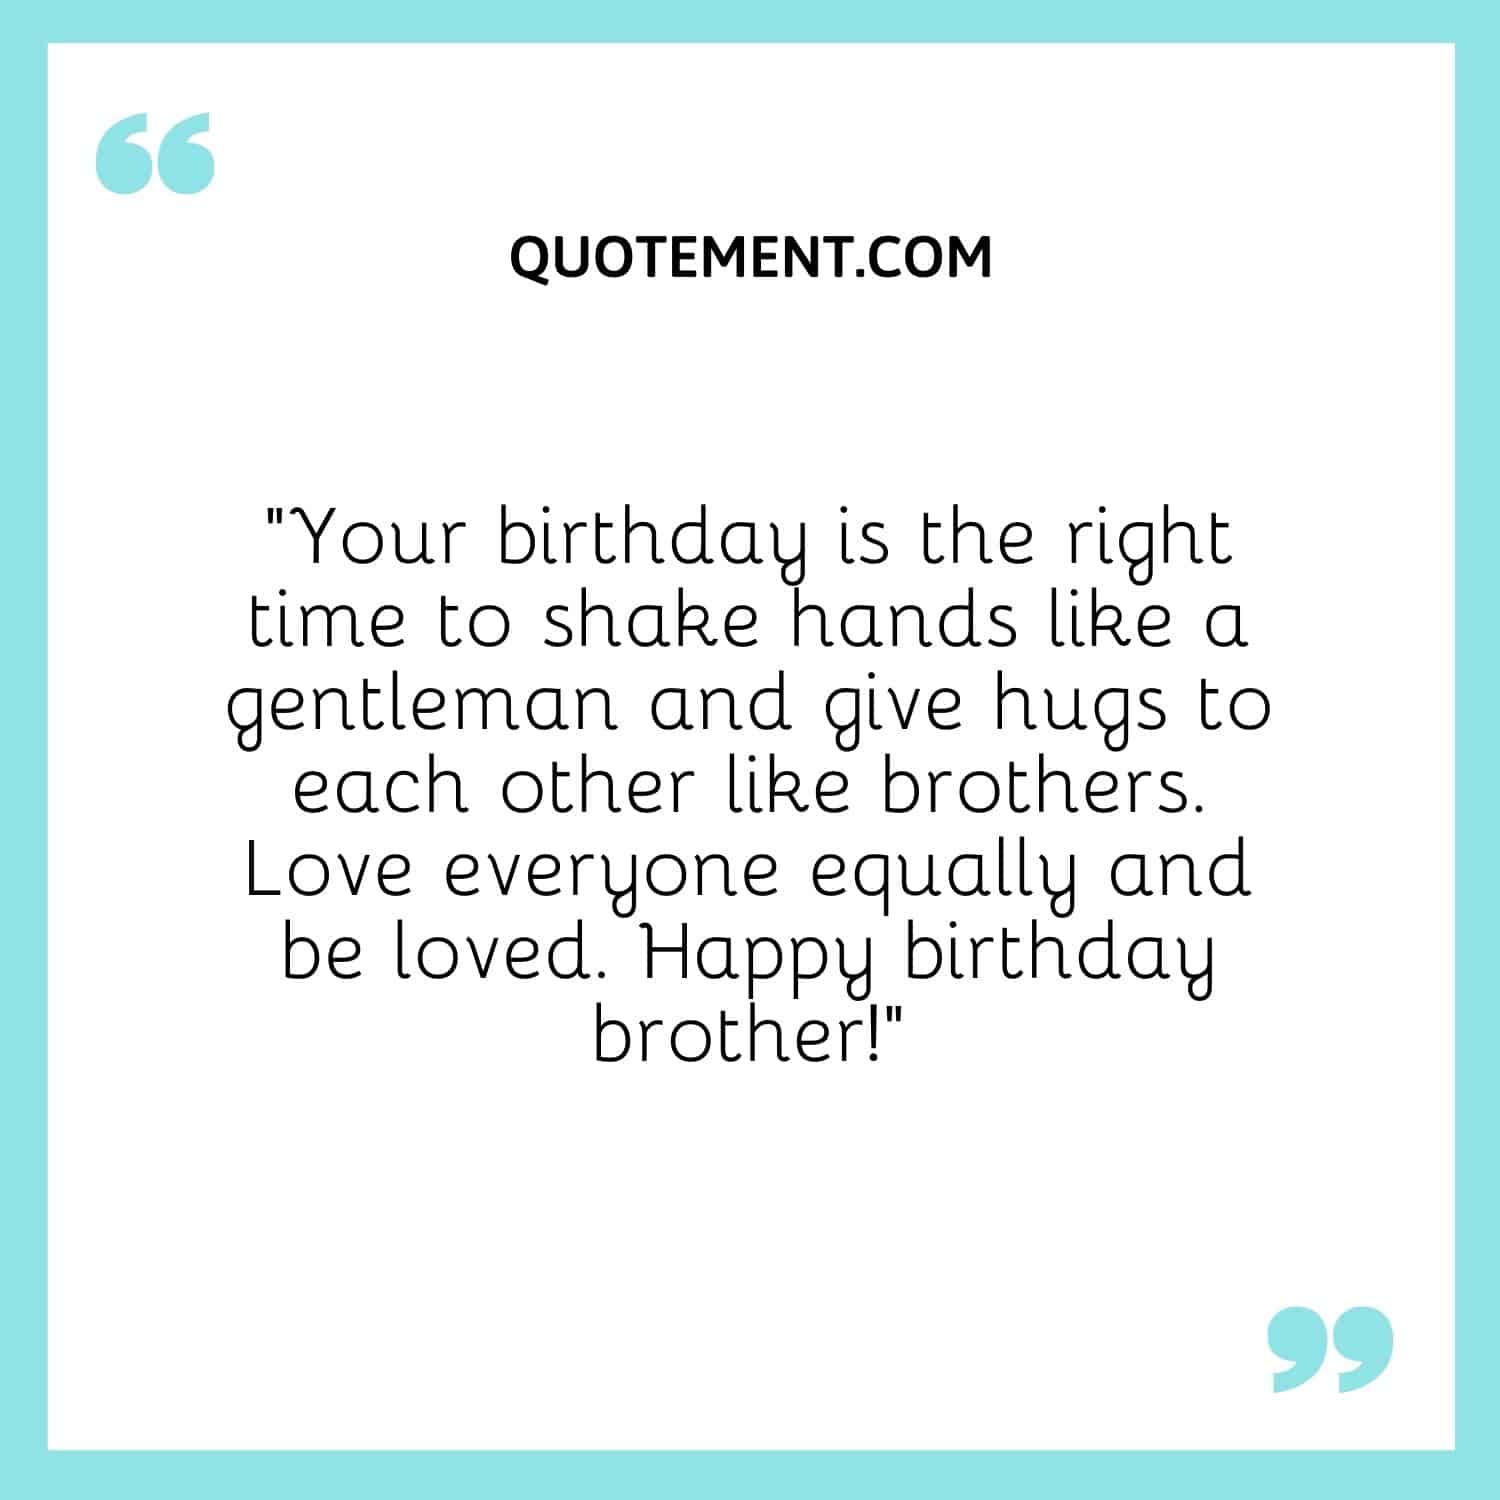 Your birthday is the right time to shake hands like a gentleman and give hugs to each other like brothers.